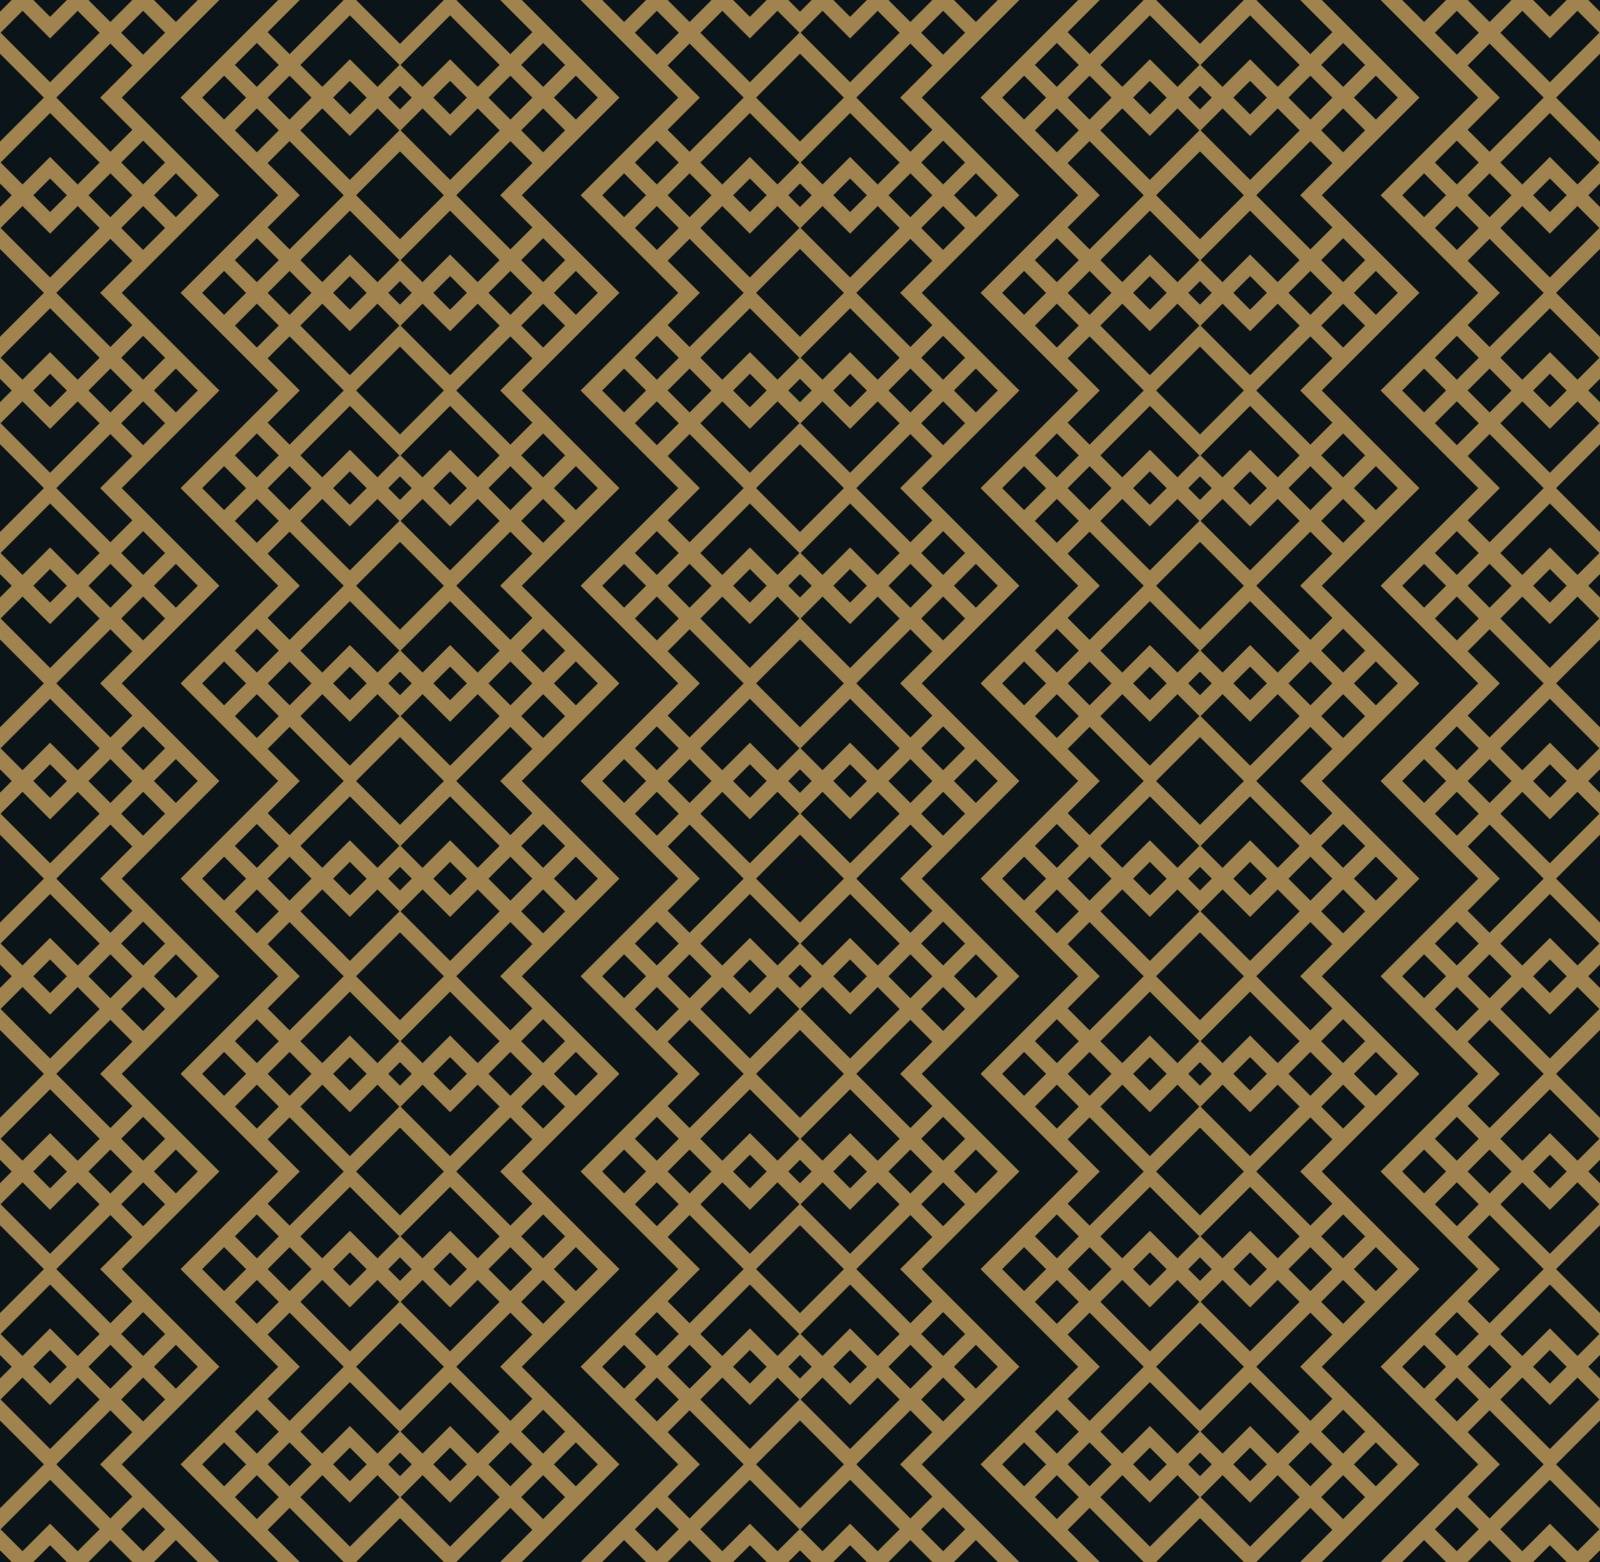 Vector modern geometric tiles pattern. golden lined shape. Abstract art deco seamless luxury background.